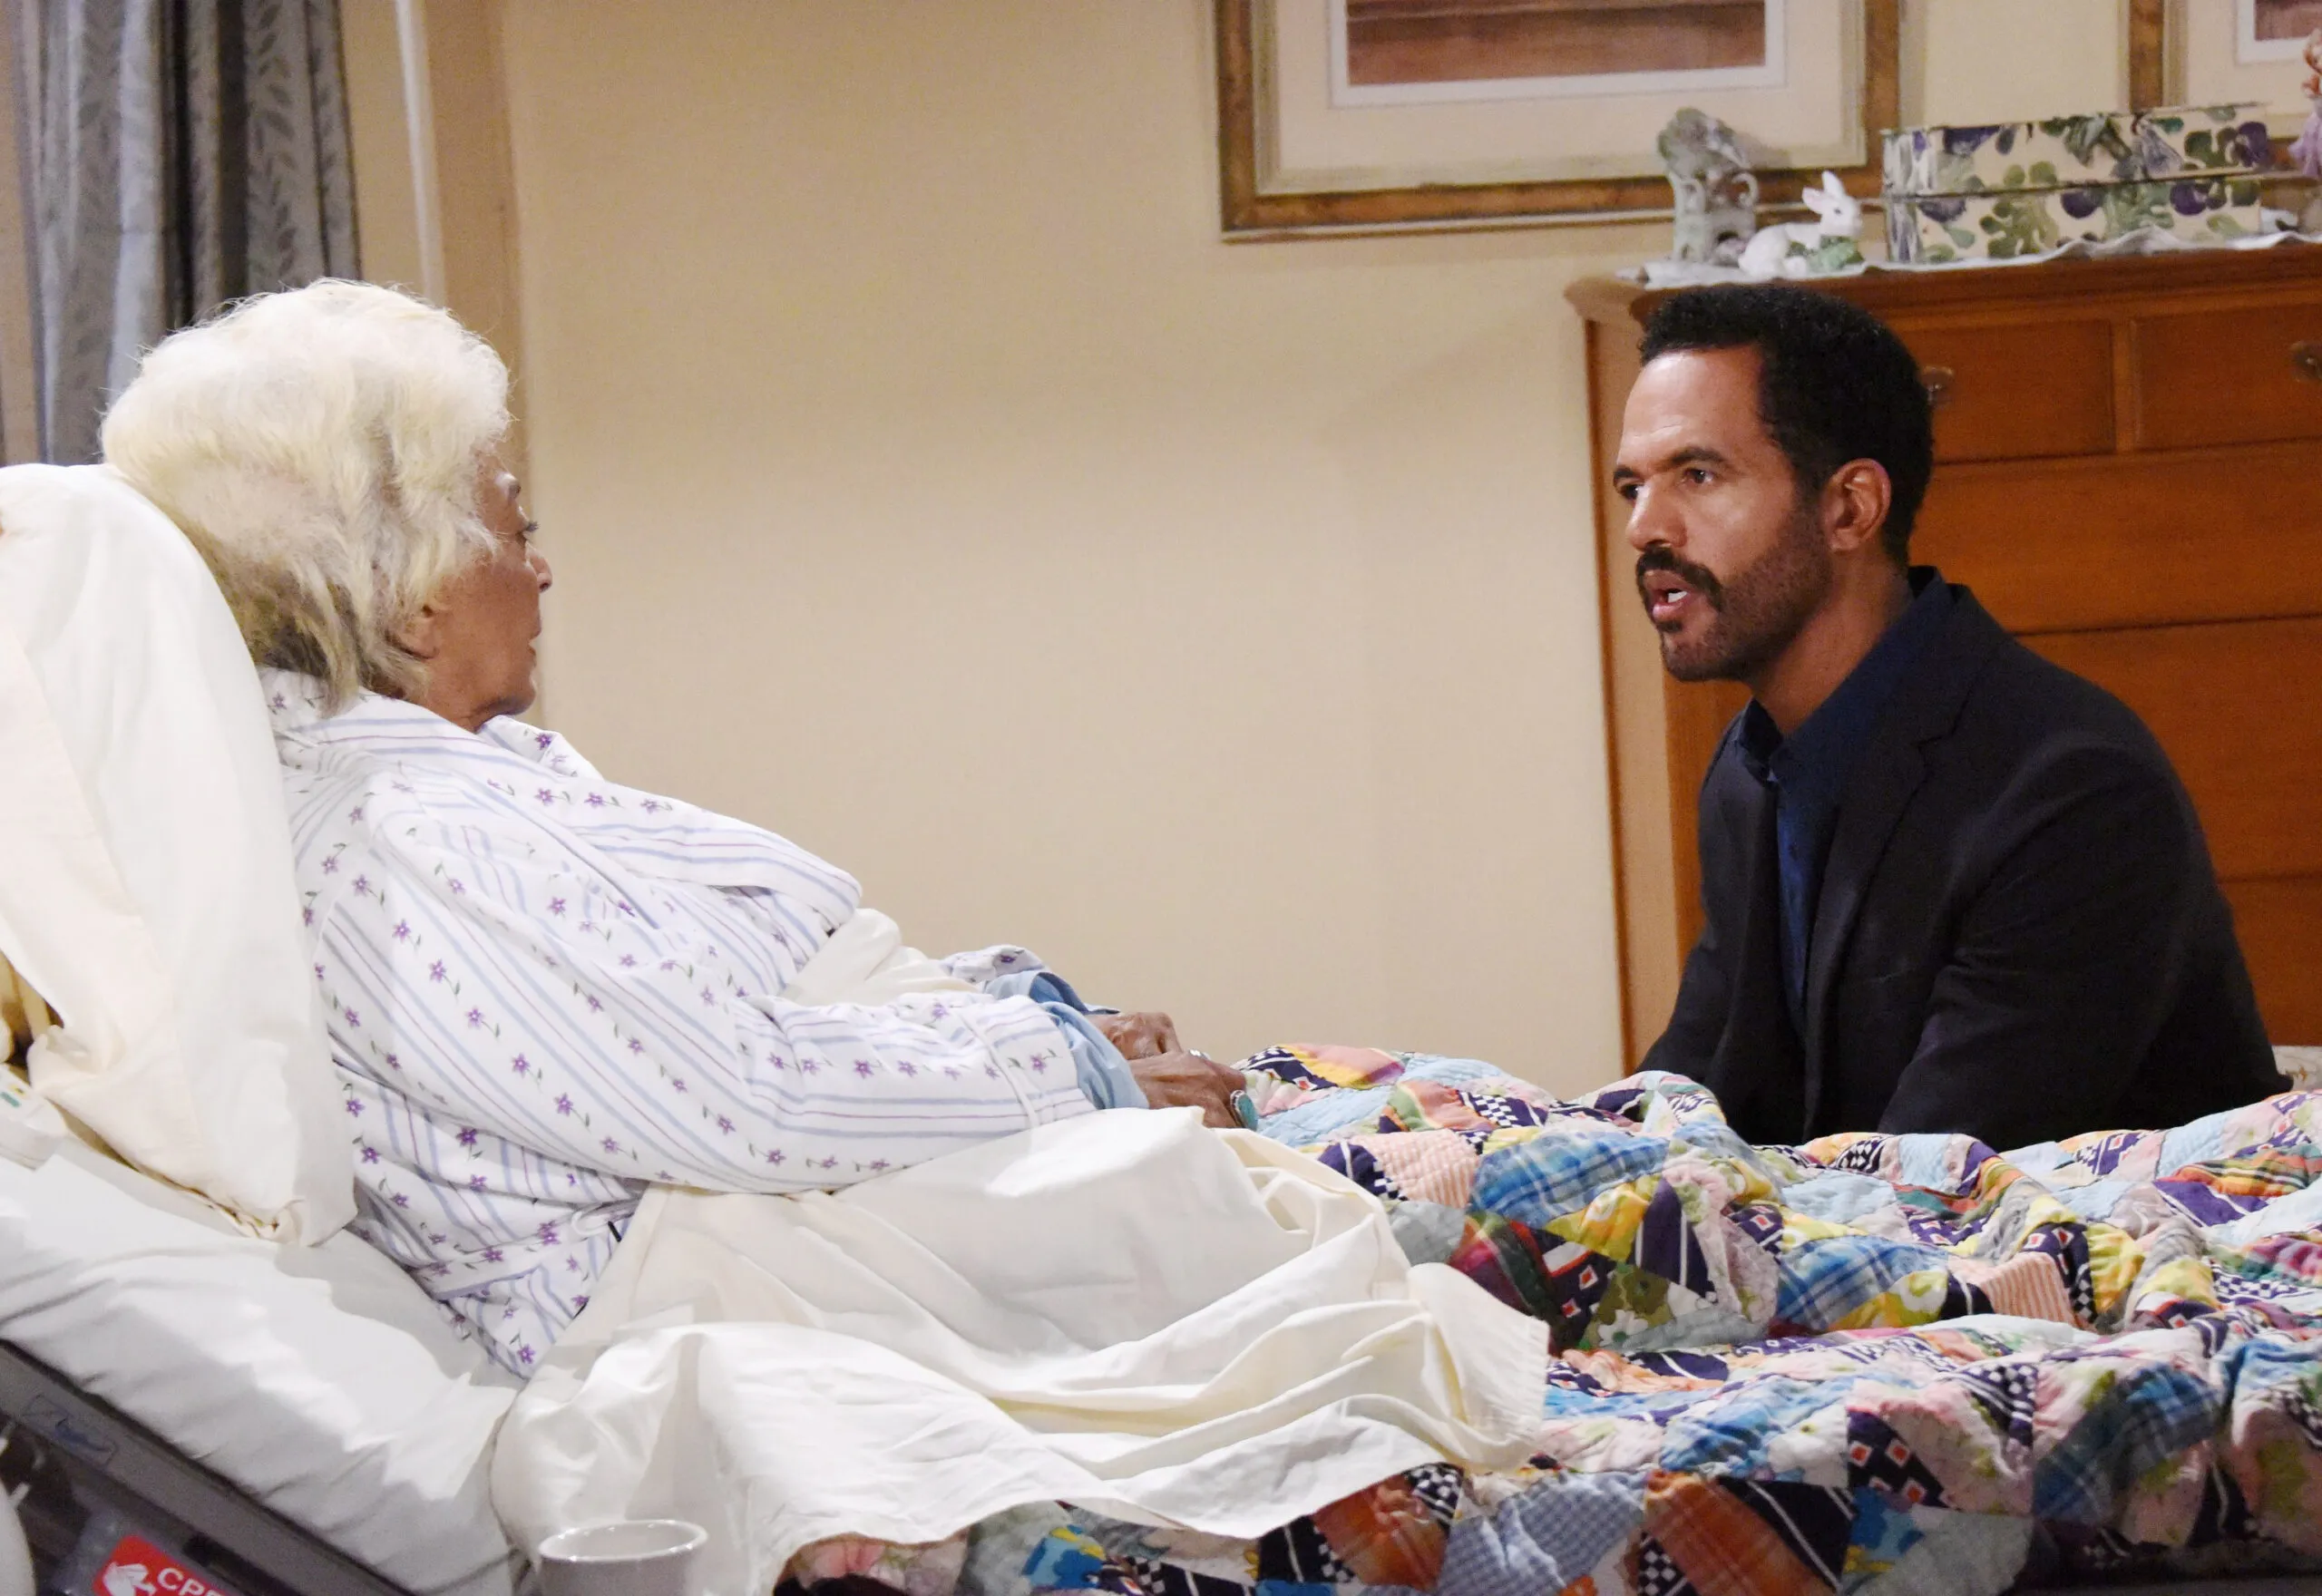 Kristoff St John, Nichelle Nichols "The Young and the Restless" Set 